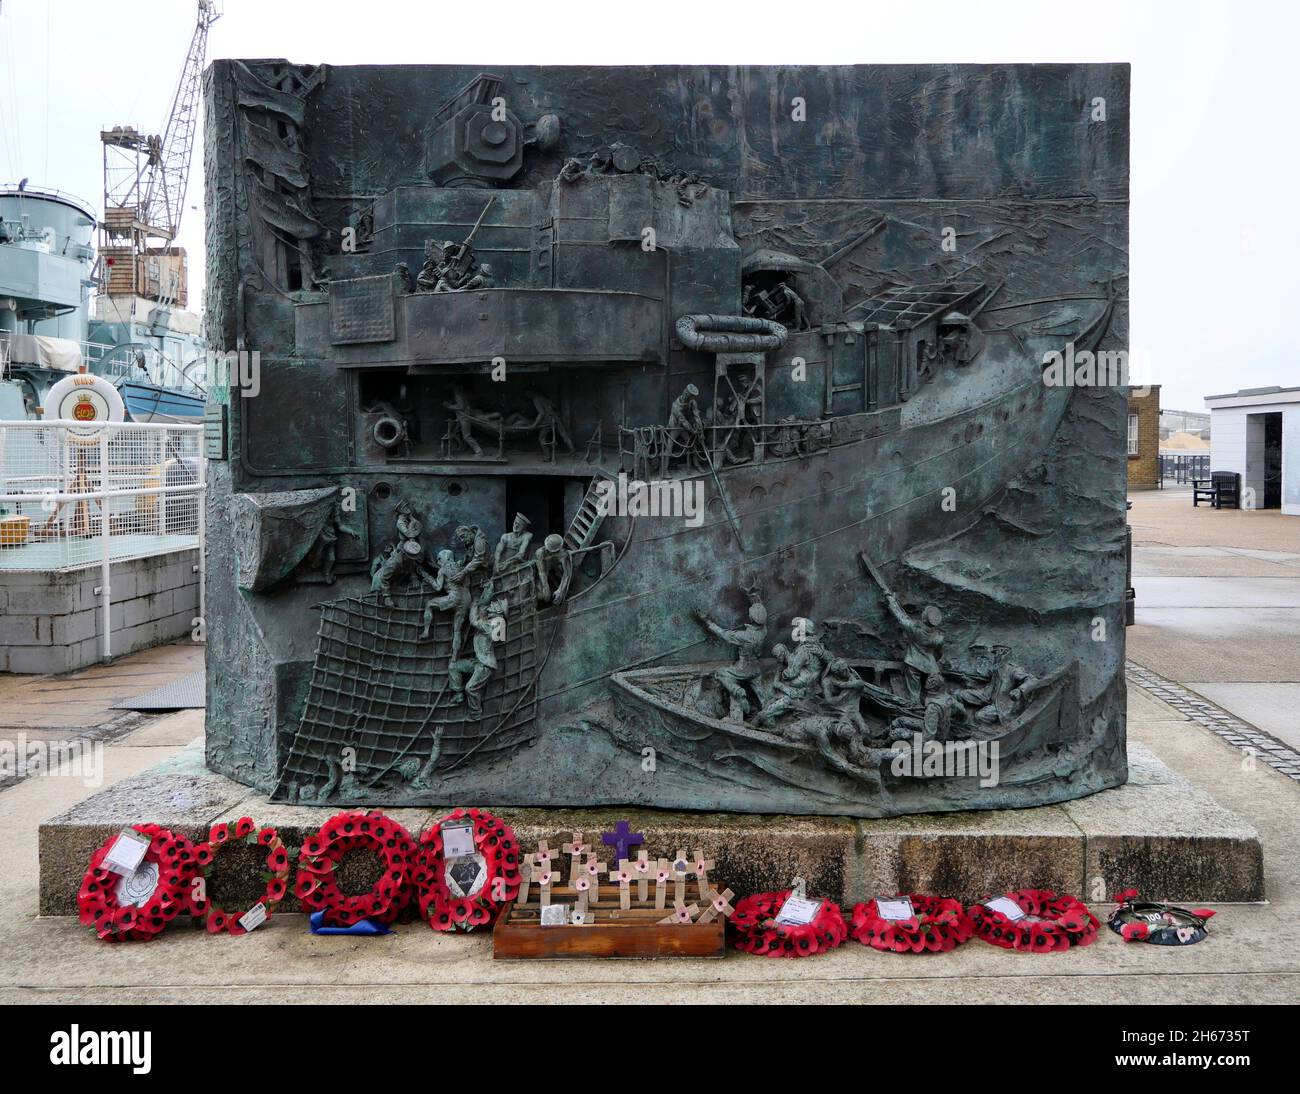 AJAXNETPHOTO. 3RD APRIL, 2019. CHATHAM, ENGLAND. - CHATHAM HISTORIC DOCKYARD - THE NATIONAL DESTROYER MEMORIAL, A BRONZE SCULPTURE SITED ALONGSIDE PRESERVED WW II C CLASS DESTROYER HMS CAVALIER TO THE 11,000 MEN AND 142 ROYAL NAVAL AND ALLIED DESTROYERS LOST DURING BETWEEN 1939-45. VERSO OF THE PLAQUE LISTS NAMES OF THE SHIPS LOST; SIDE FACING CAMERA DEPICTS SAILORS BEING PLUCKED FROM THE SEA BY A DESTROYER.PHOTO:JONATHAN EASTLAND/AJAX REF:GX8 190304 158 Stock Photo